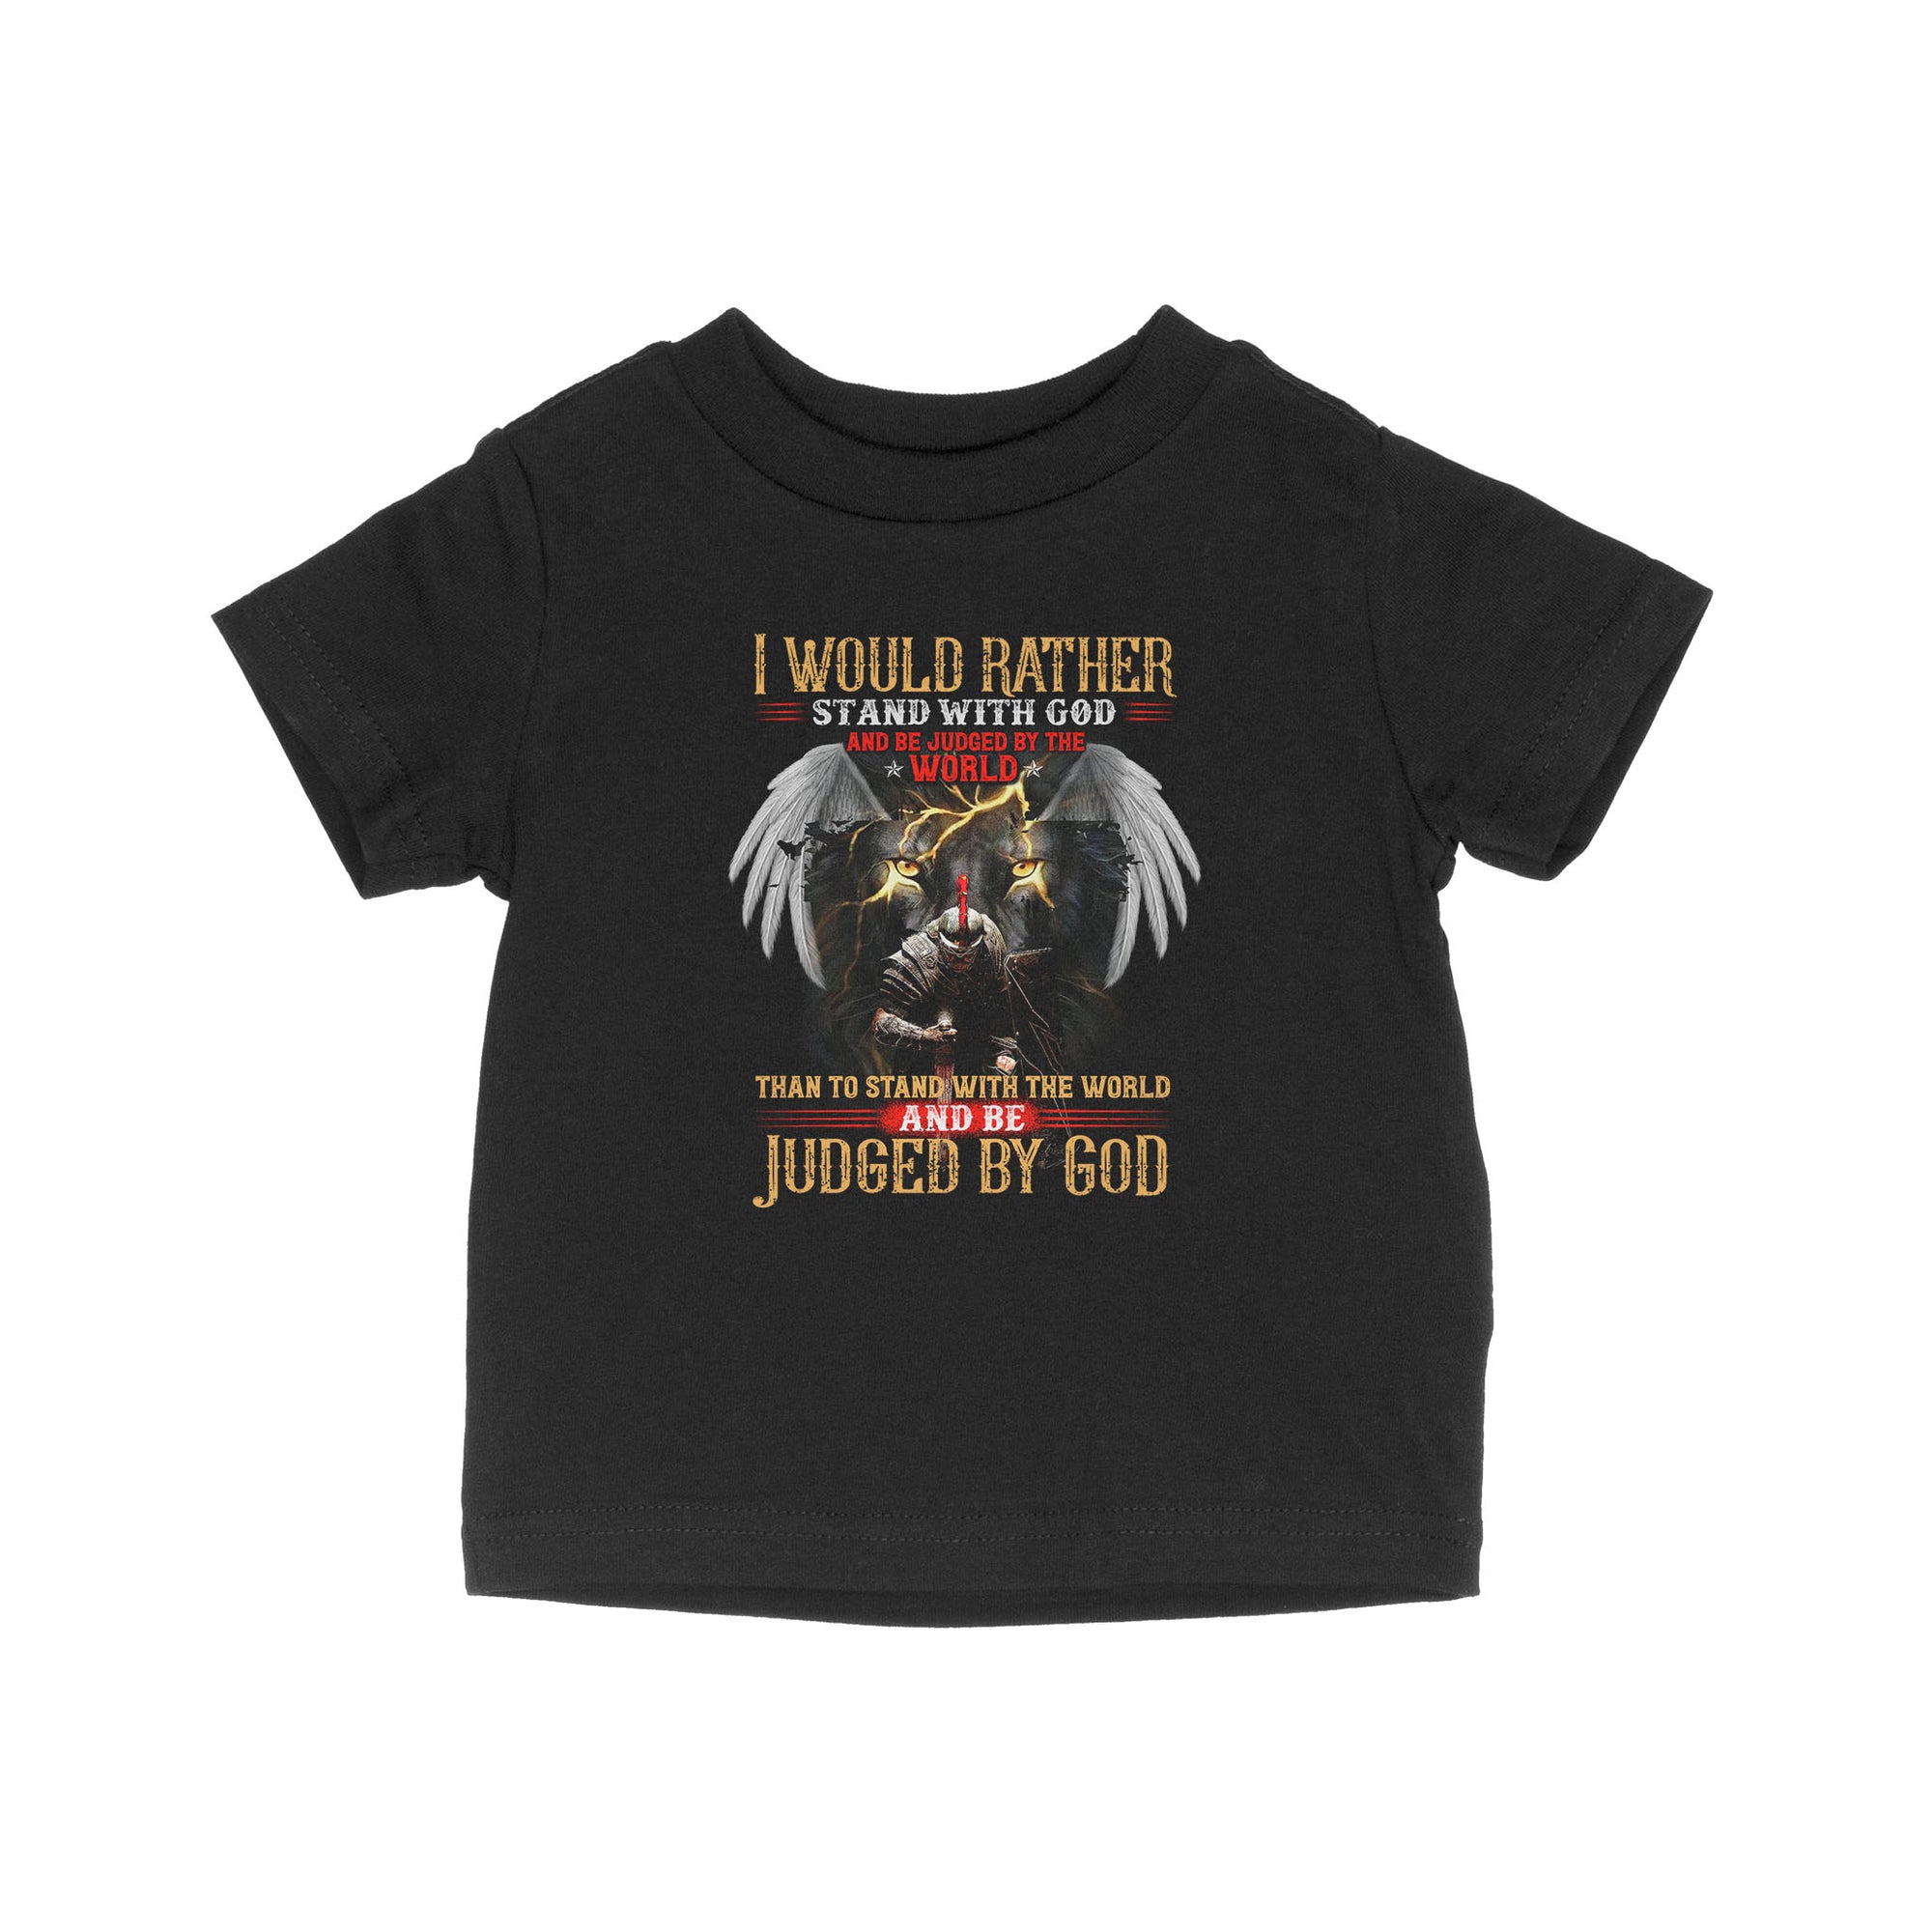 I Would Rather Stand With God And Be Judged By The World Than To Stand With The World And Be Judged By God - Baby T-Shirt